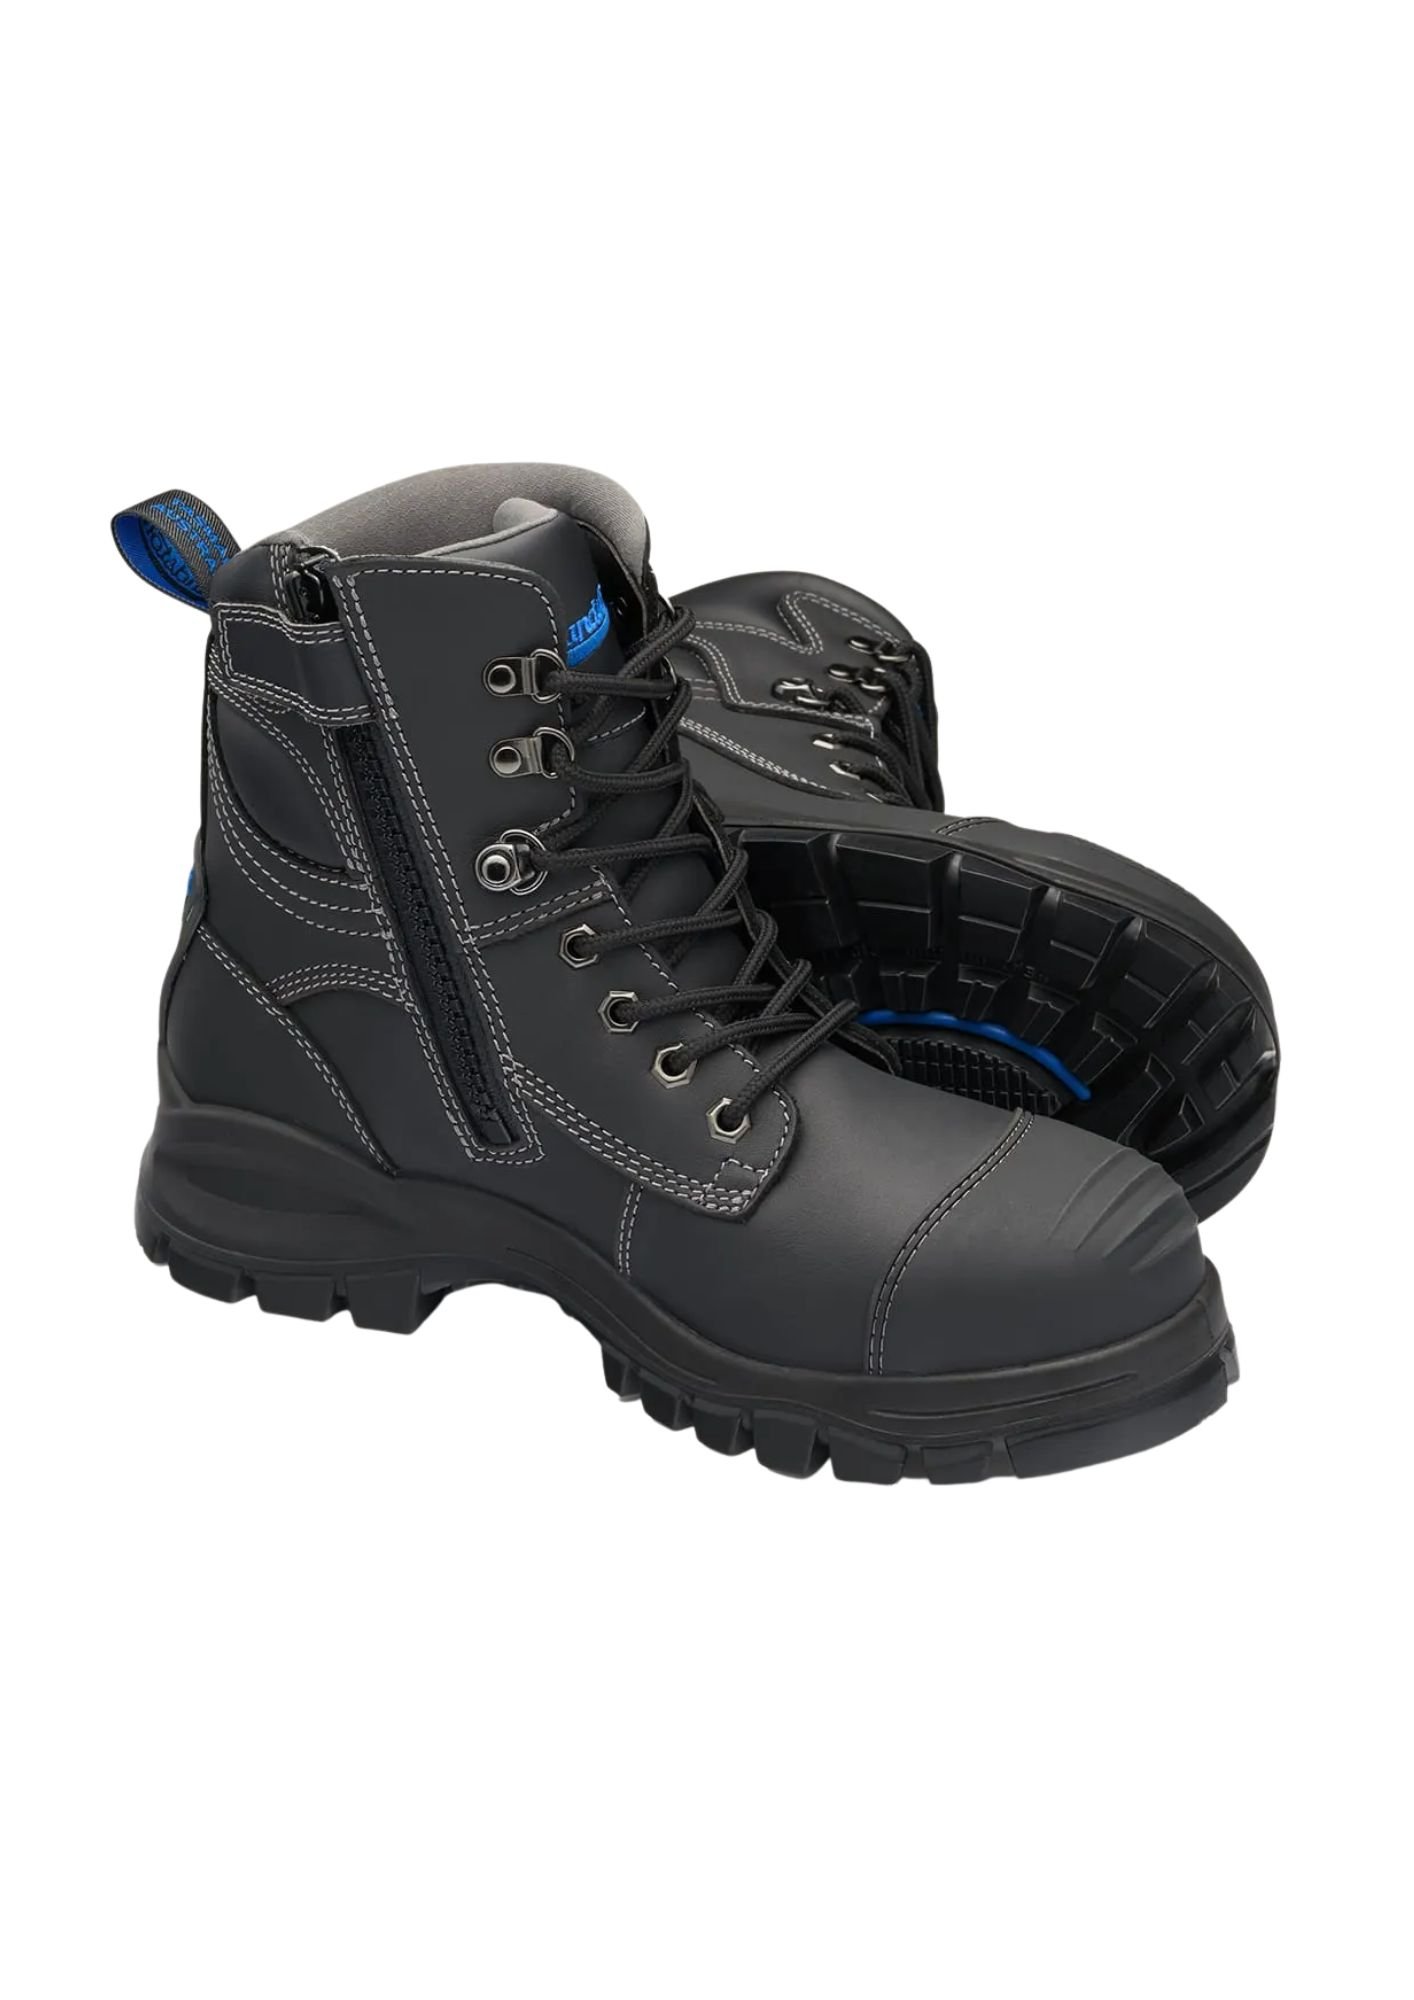 BLUNDSTONE 997 SAFETY XFOOT ZIP SIDED LACE UP BLACK - Maddison Safety